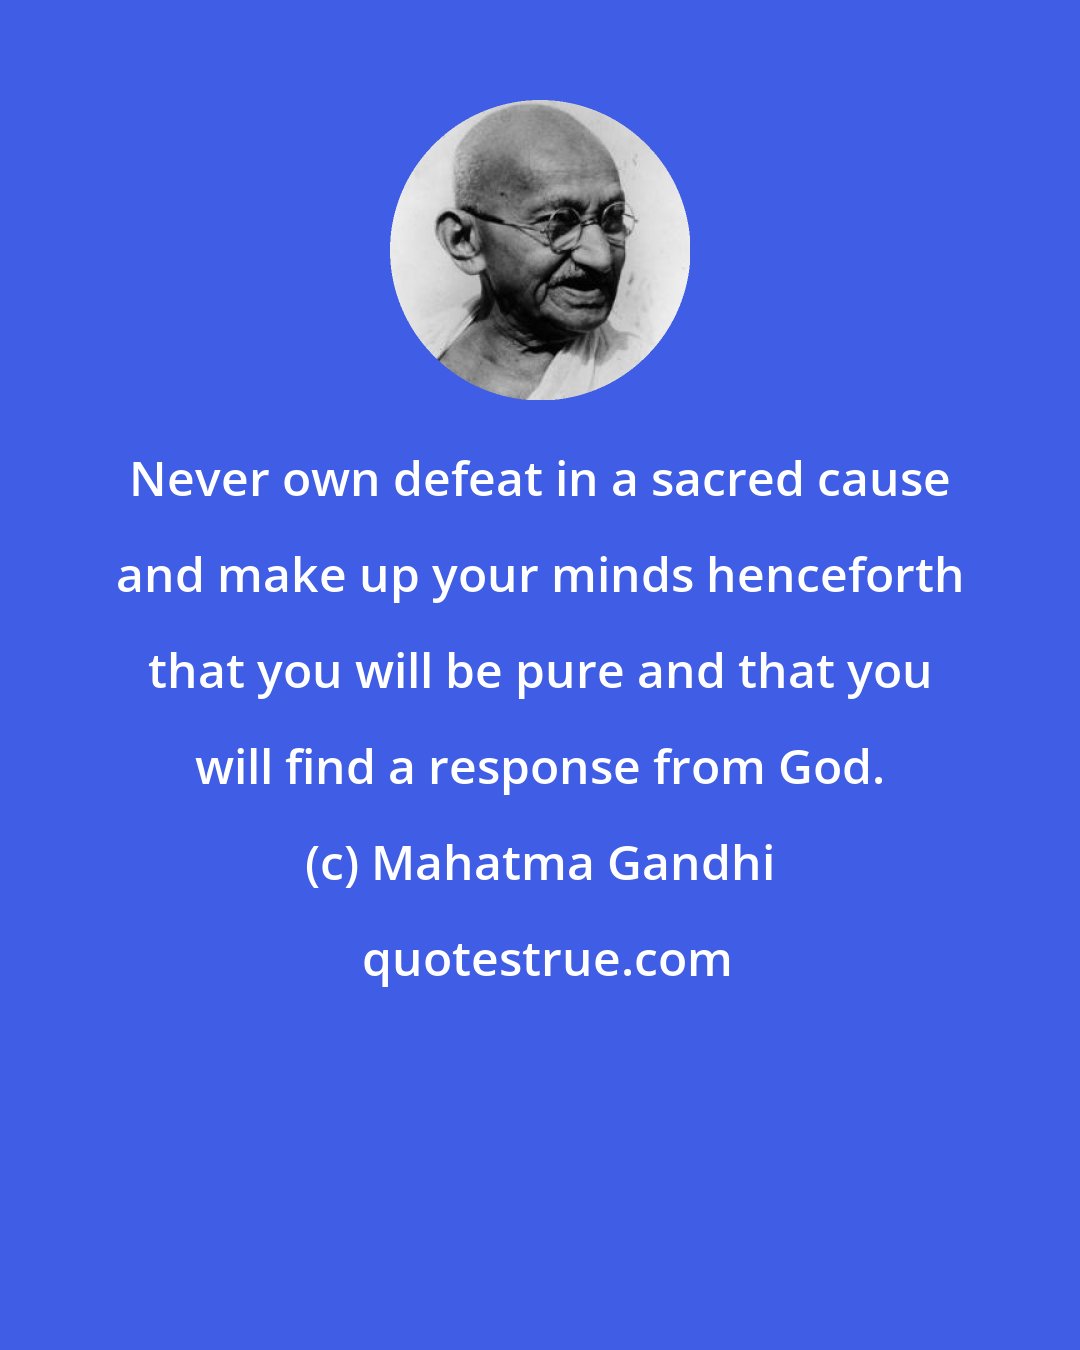 Mahatma Gandhi: Never own defeat in a sacred cause and make up your minds henceforth that you will be pure and that you will find a response from God.